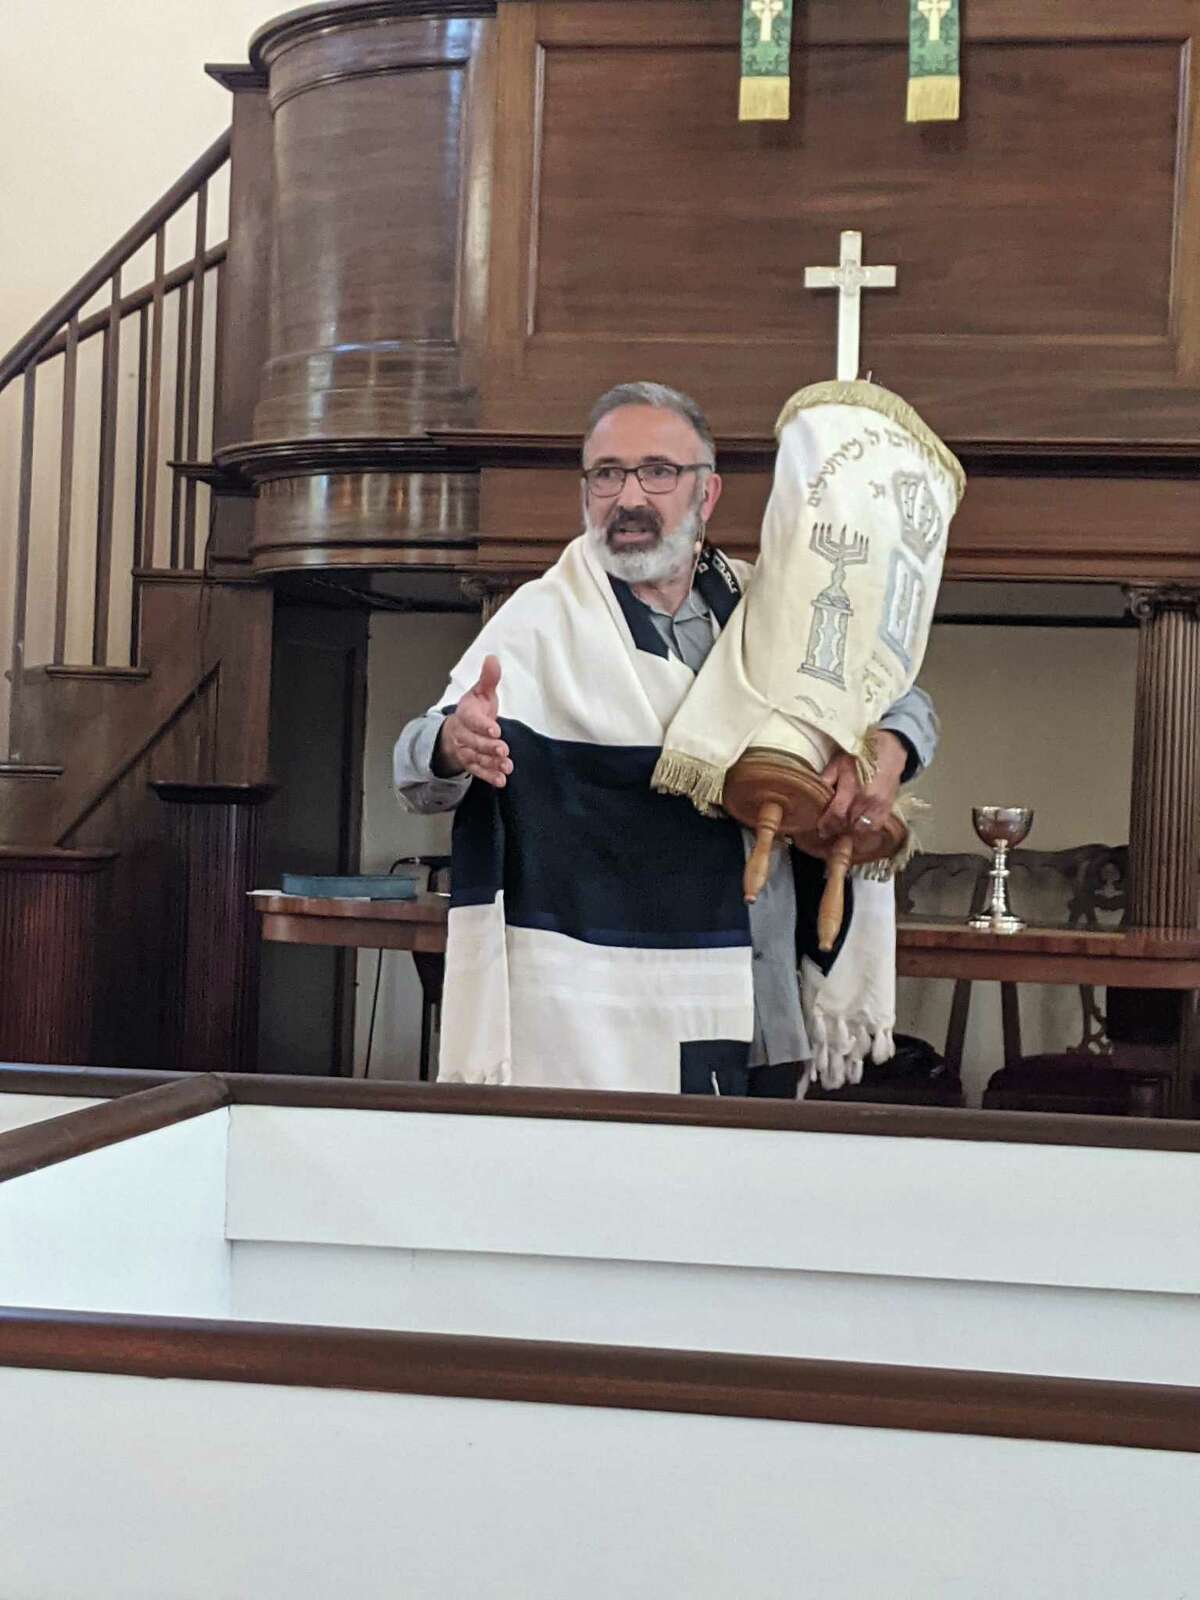 Rabbi Peter Oliveira is the pastor of the First Congregational Church of Litchfield.